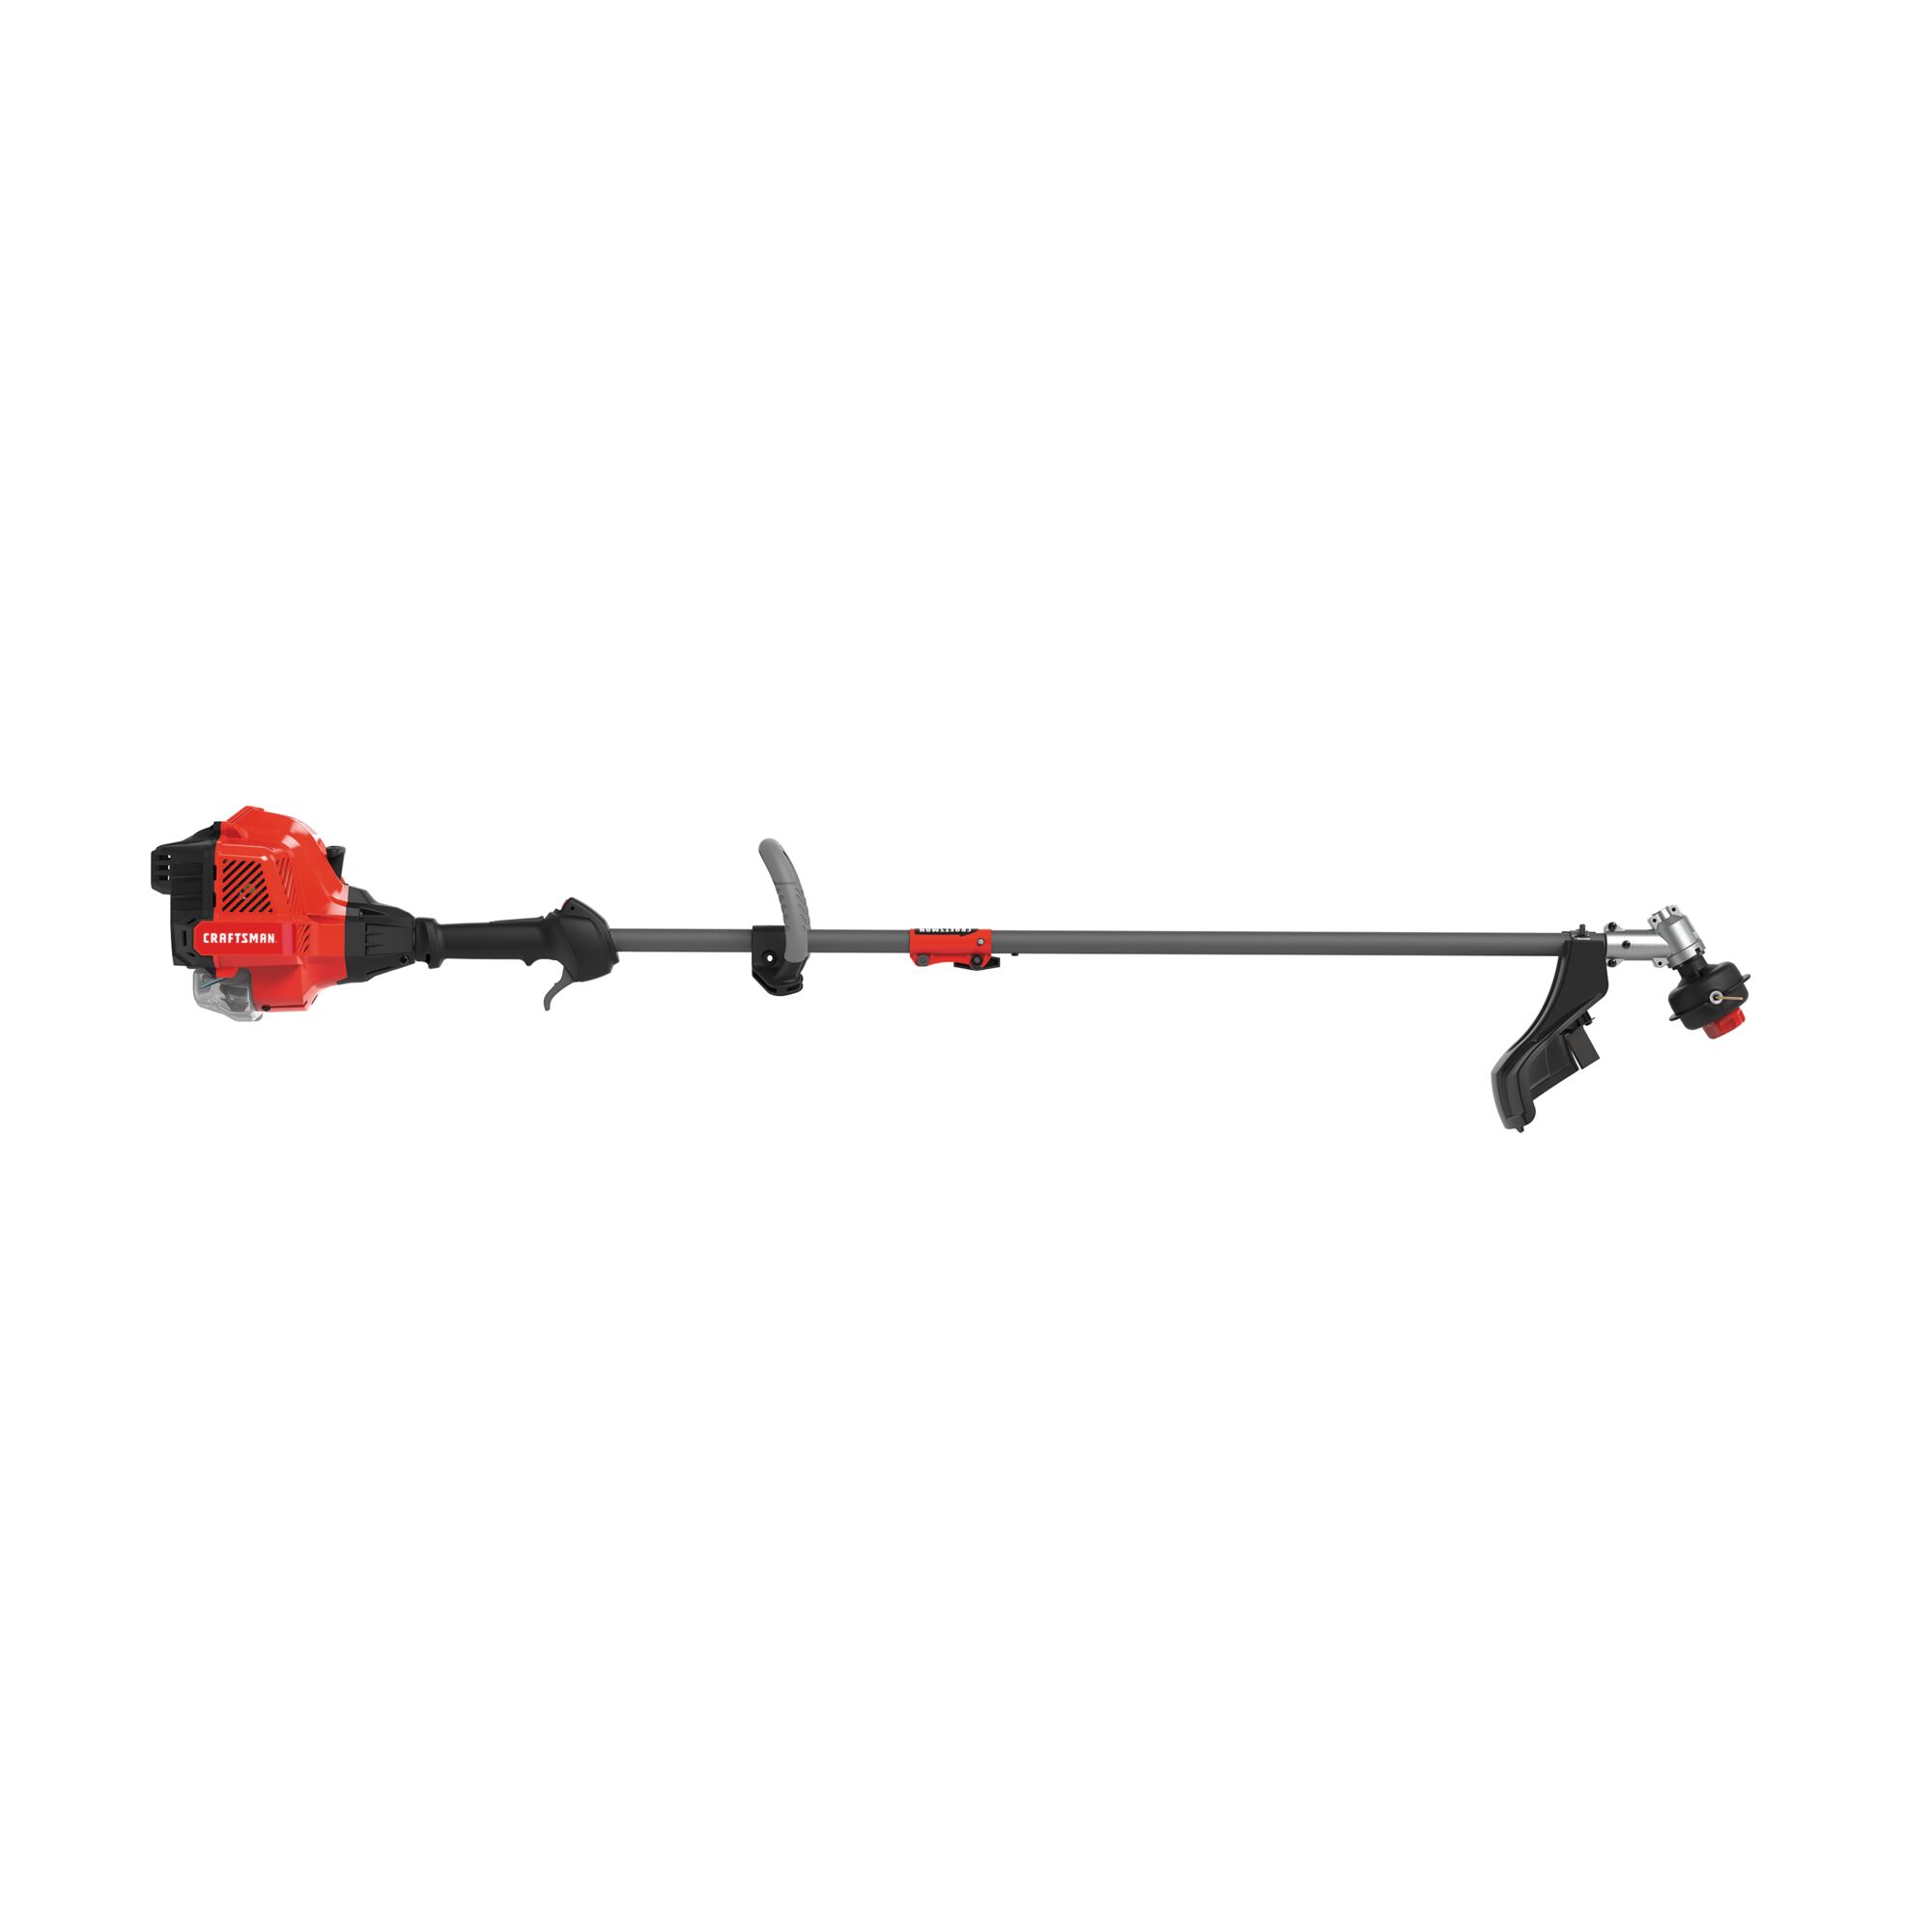 Profile of W S 2200 weedwacker 25 C C 2 cycle 17 inch attachment capable straight shaft gas trimmer.